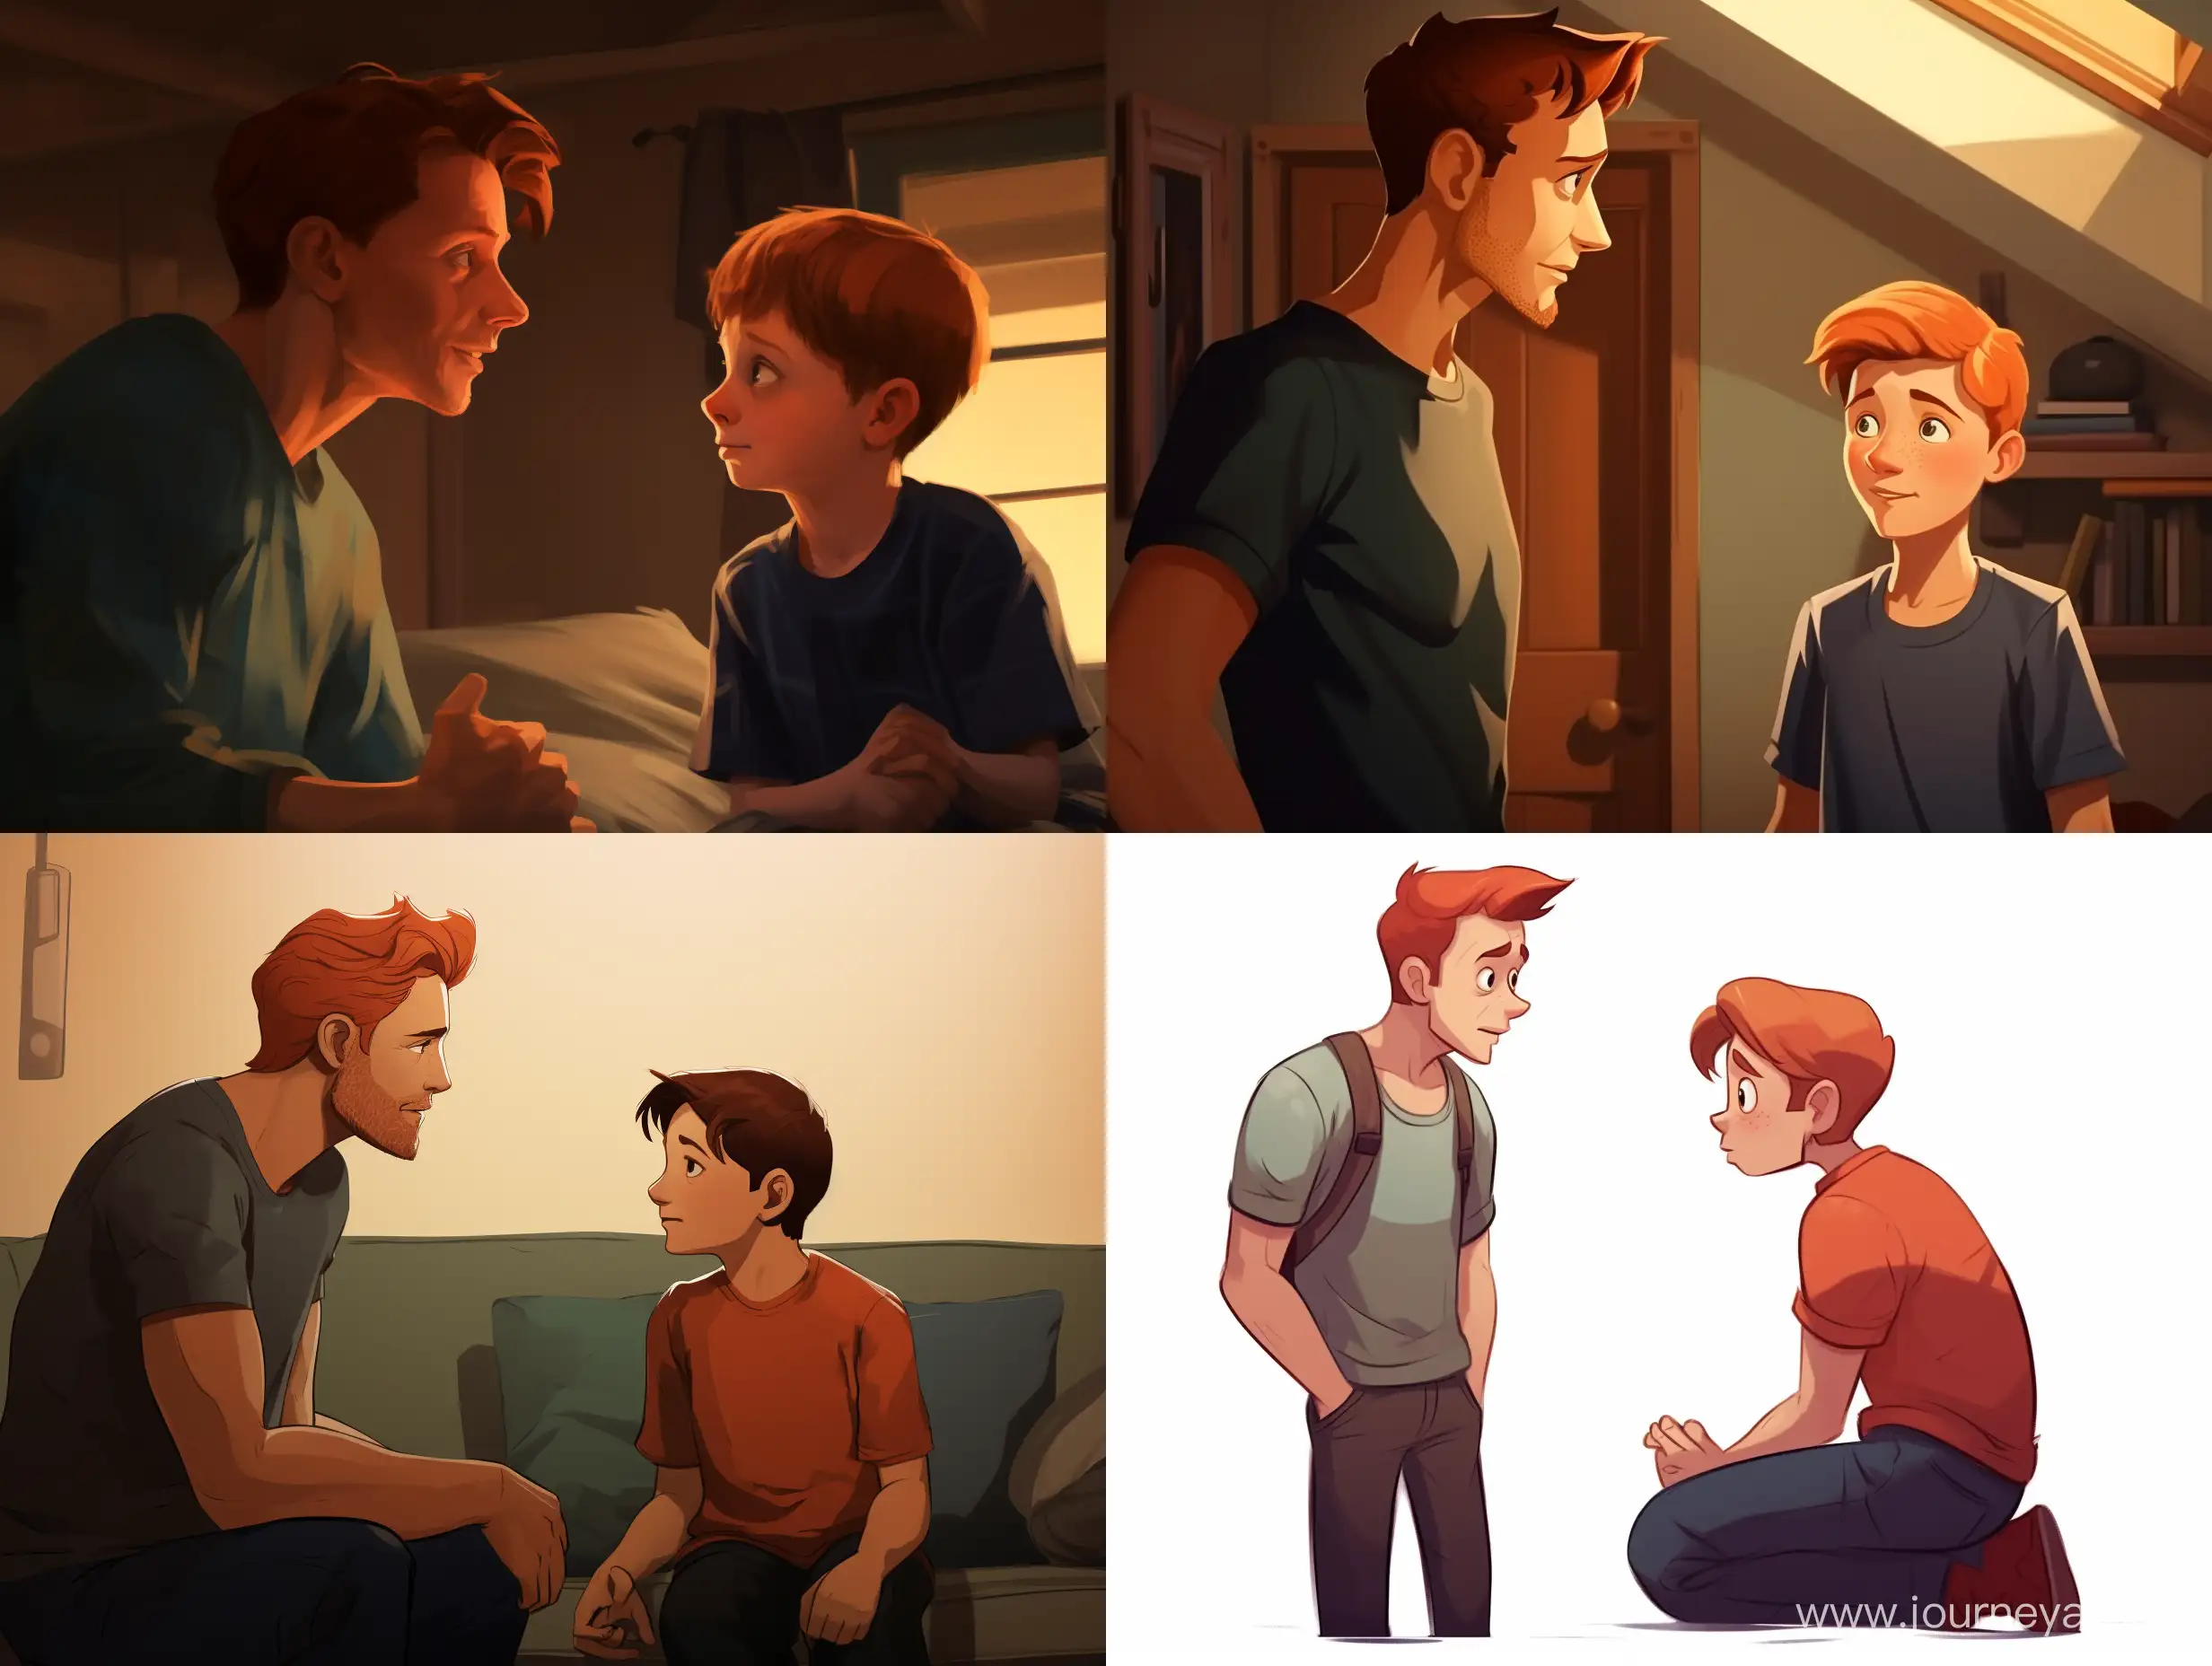 Casual-Conversation-Between-RedHaired-Young-Man-and-DarkHaired-SixYearOld